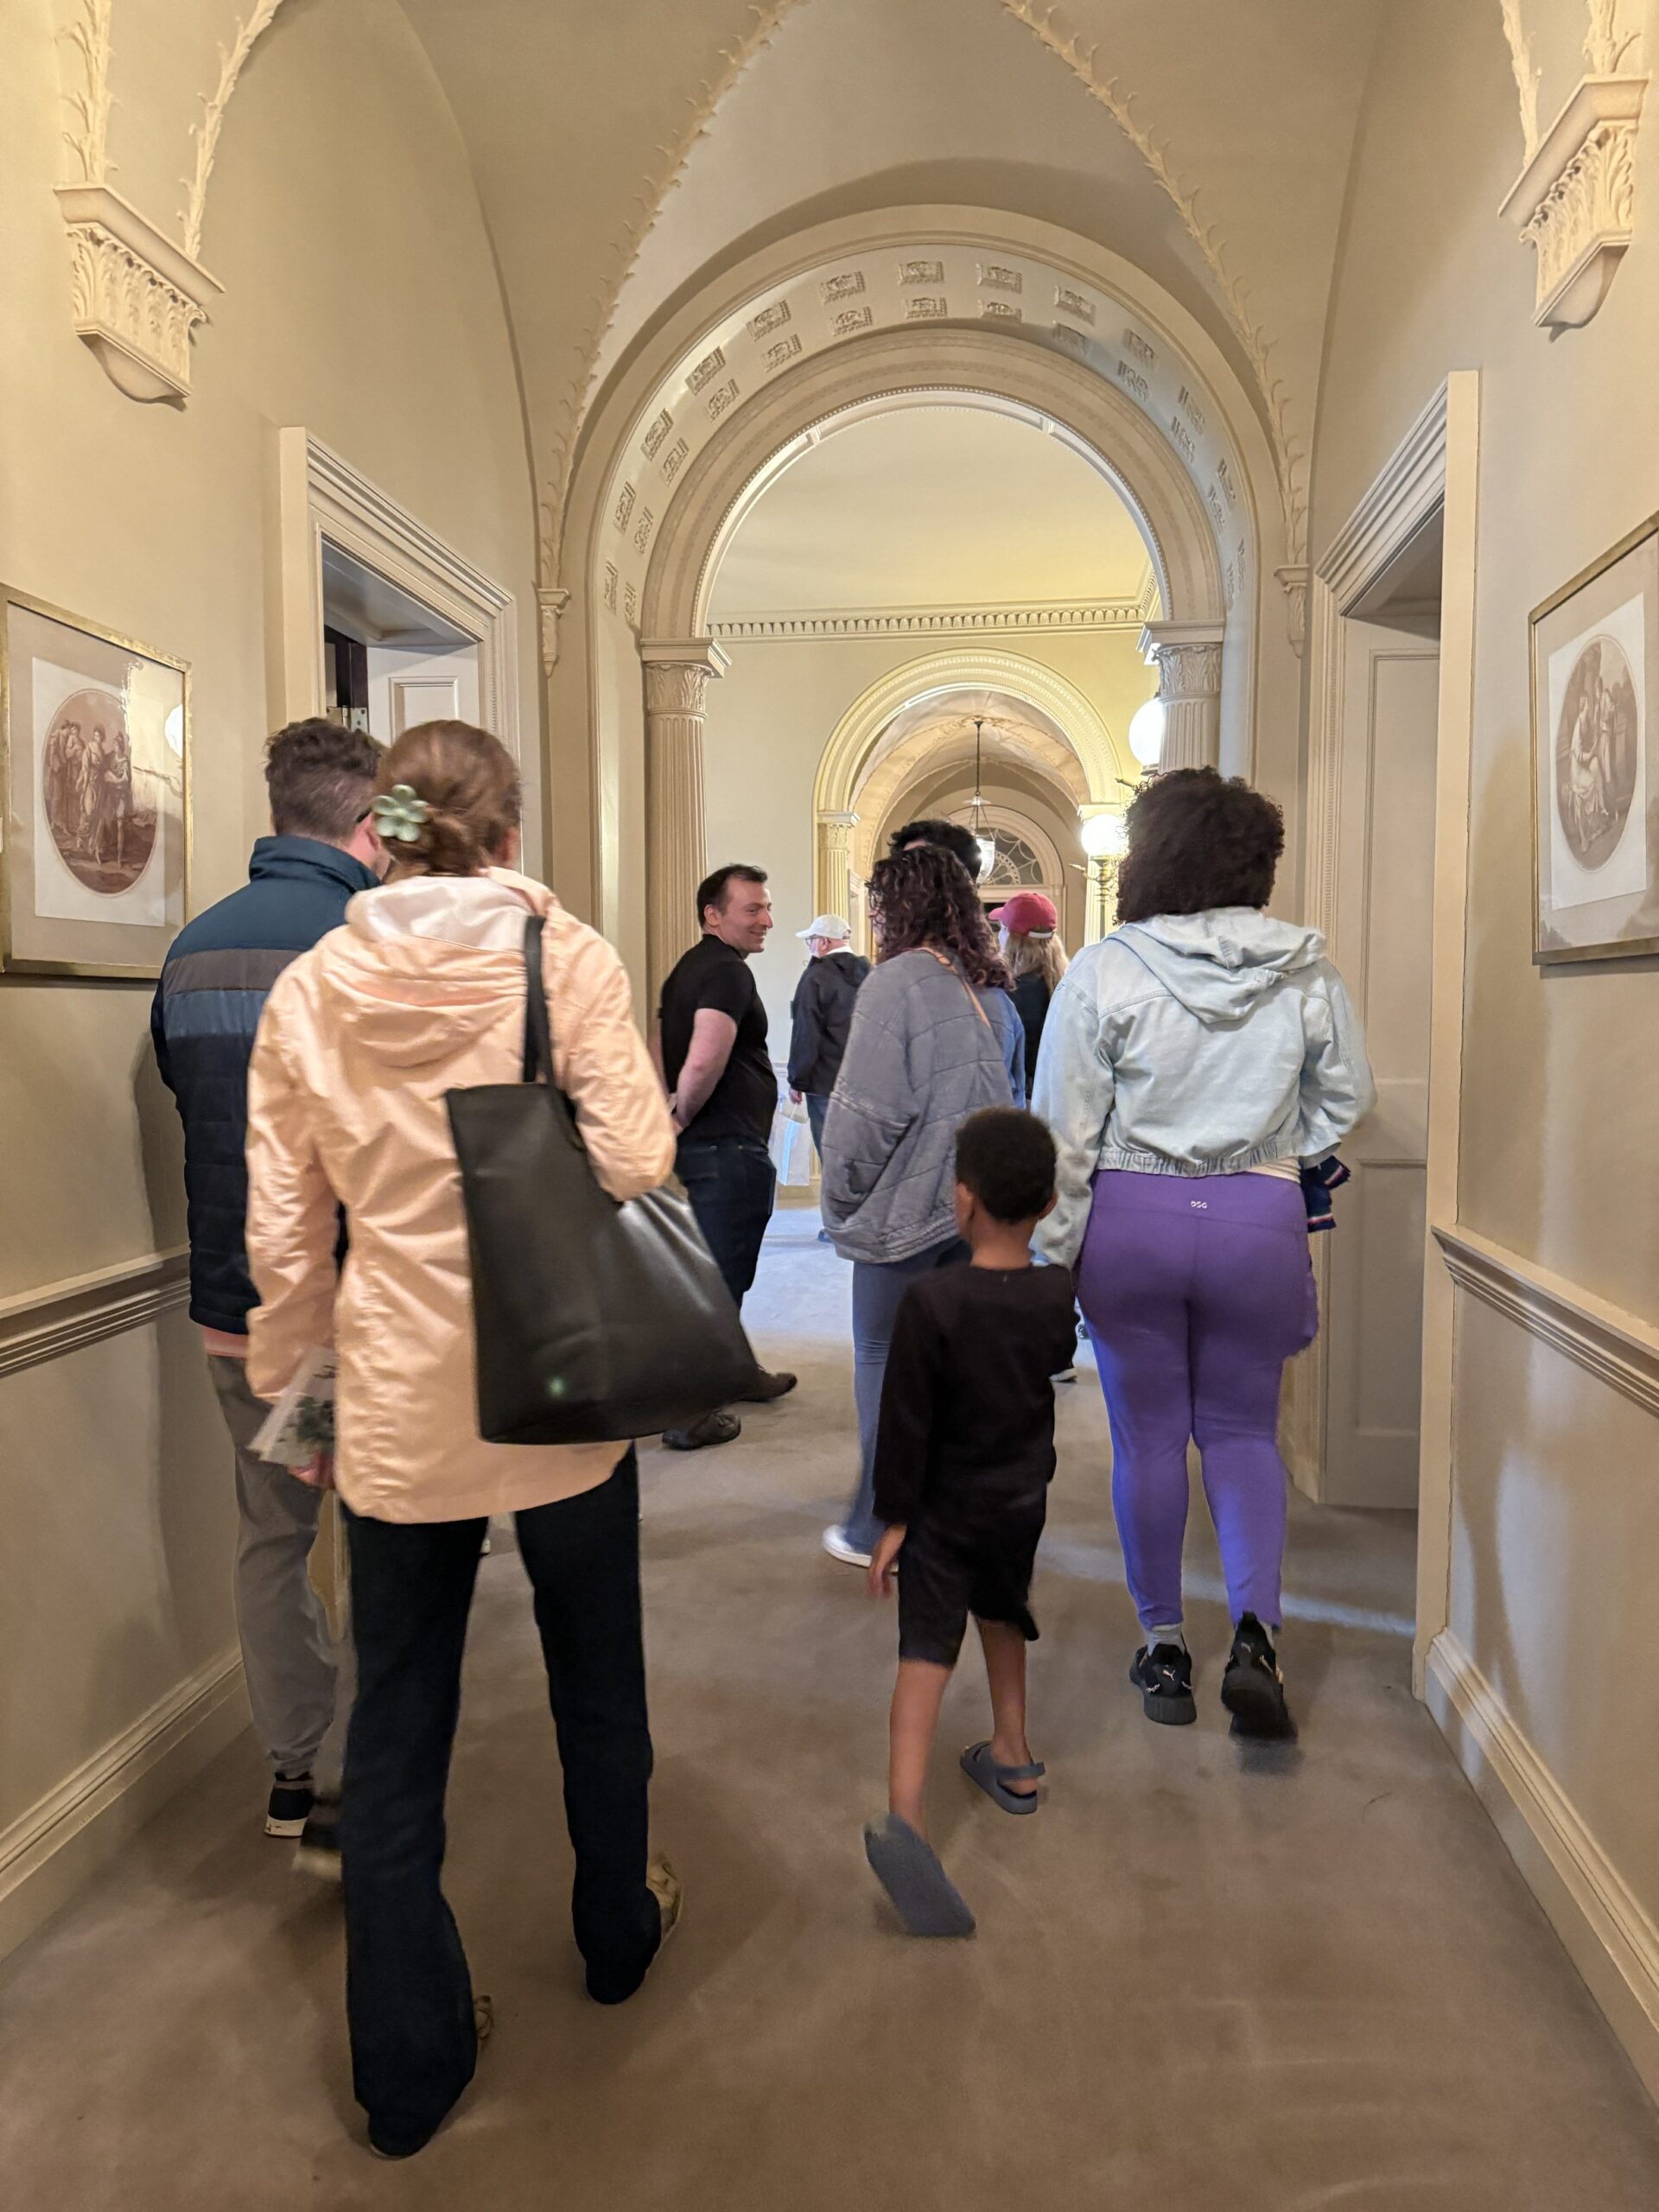 Several people with their backs turned walk the halls of the Crane Estate. They are walking through an arched cream-colored hallway with art on both sides.